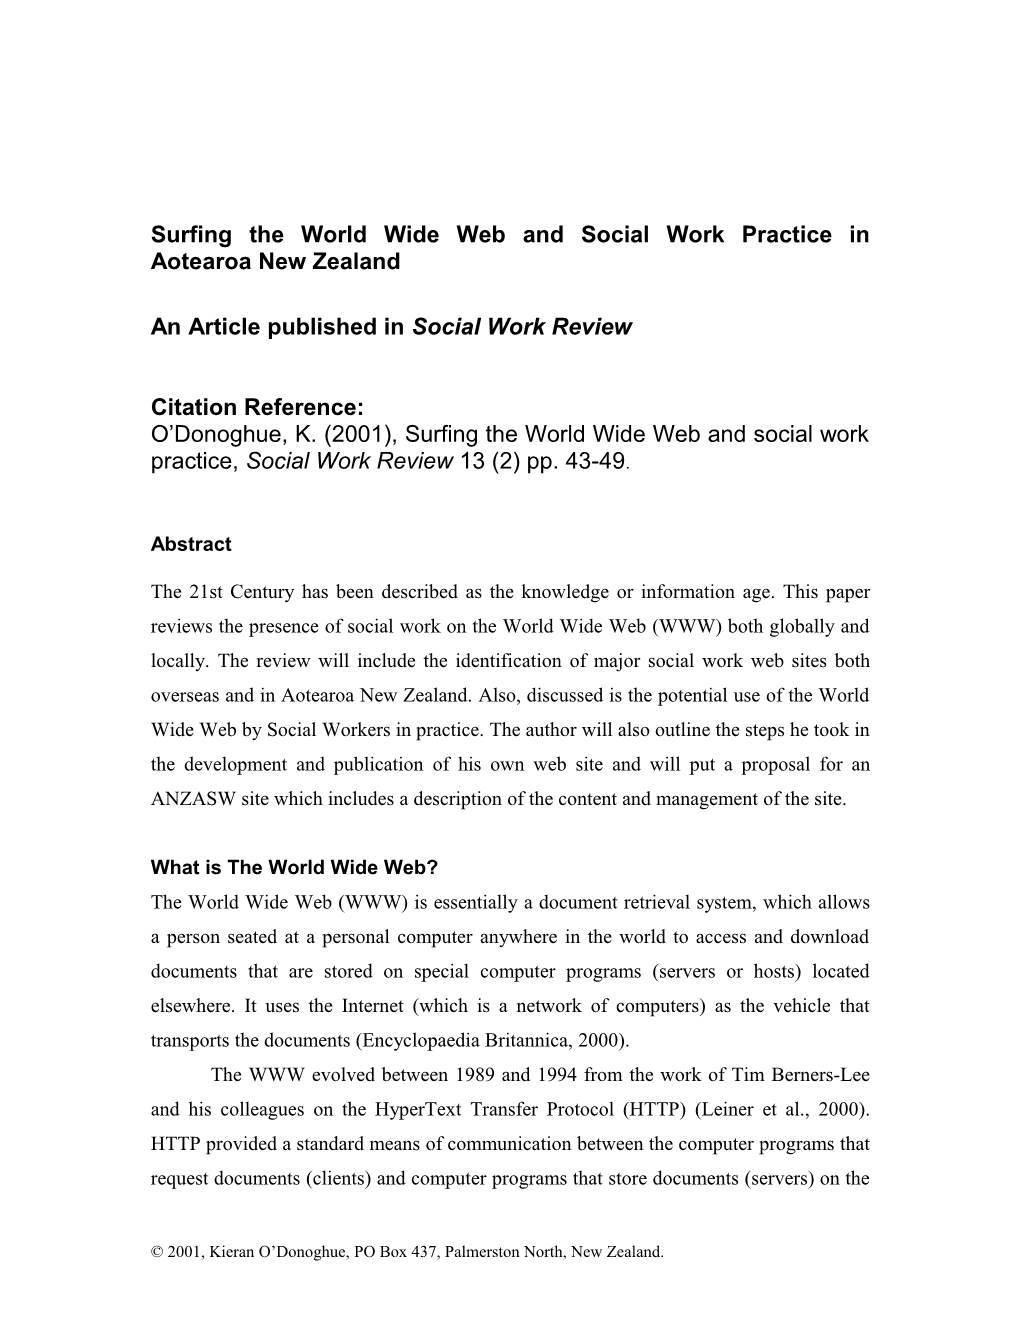 Surfing the World Wide Web and Social Work Practice in Aotearoa New Zealand